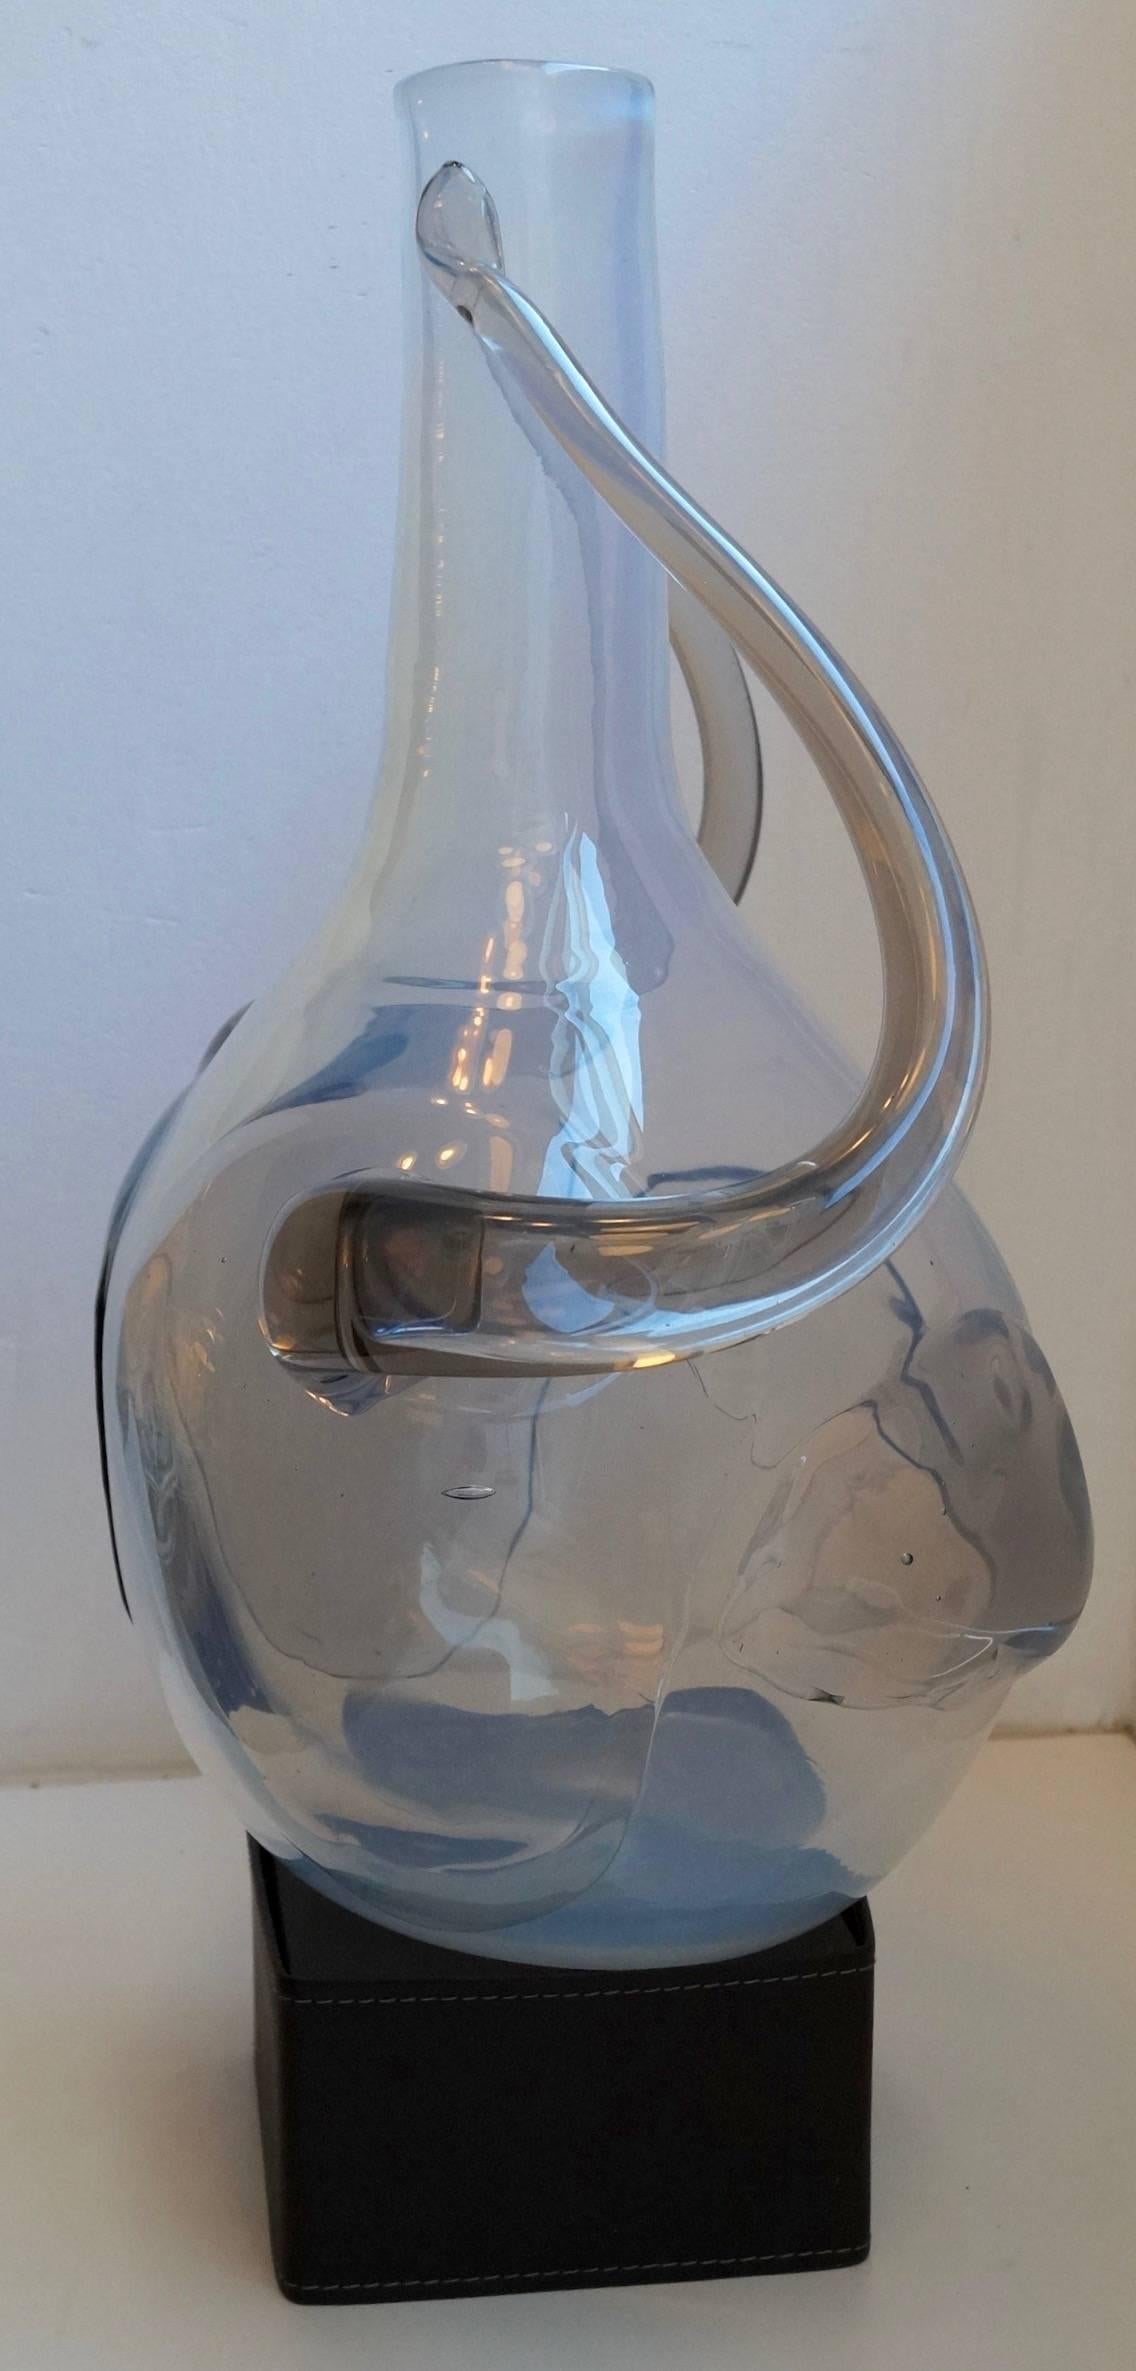 Claire Falkenstein (1908-1997), rare glass sculpture/vase remembering at a female torso, designed about 1973, for Salviati/Murano, main body consists of opalescent handblown glass, with gray/green applied handles and prefrontal and lateral volume